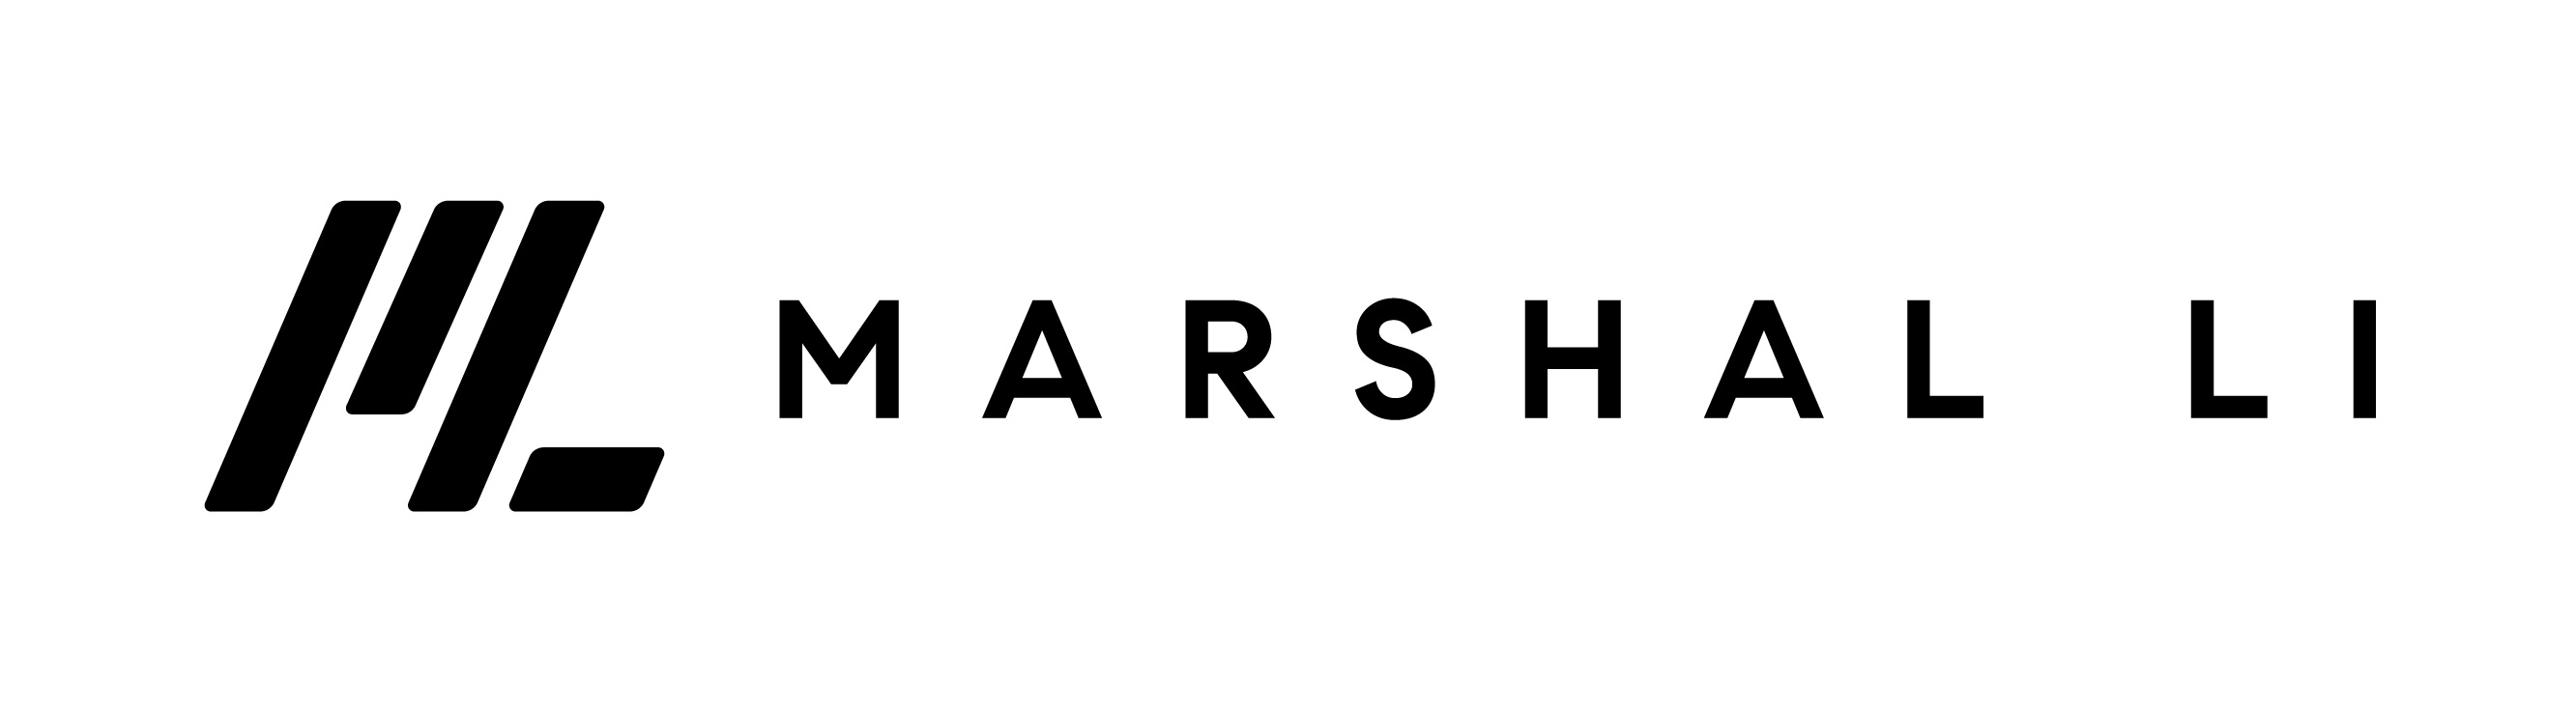 A black logo that reads &quot;Marshal Li&quot; with stylized initials &quot;M&quot; and &quot;L&quot; to the left.